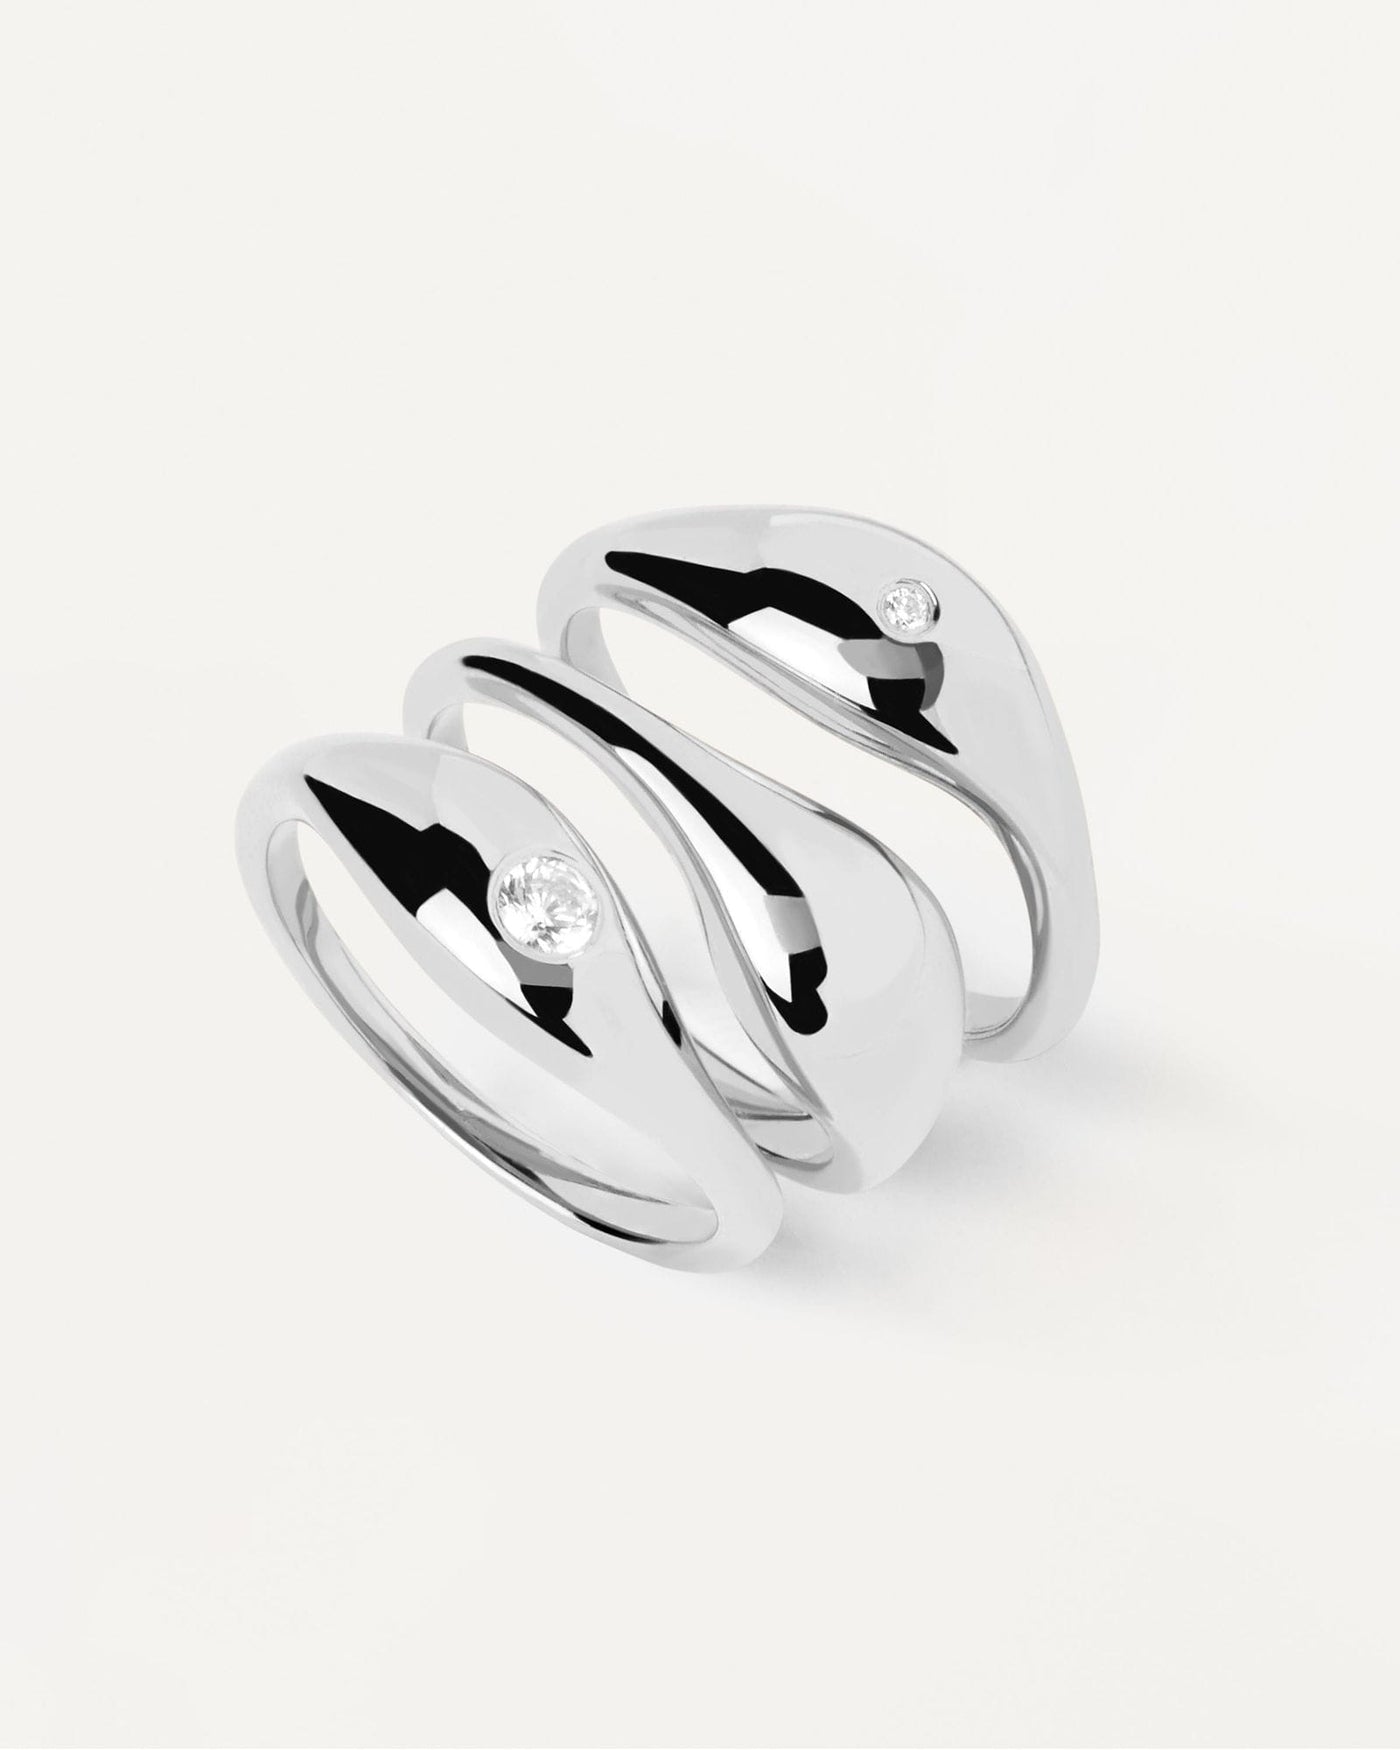 2024 Selection | Sugar Silver Ring Set. Sterling silver set of three rings with white zirconia. Get the latest arrival from PDPAOLA. Place your order safely and get this Best Seller. Free Shipping.